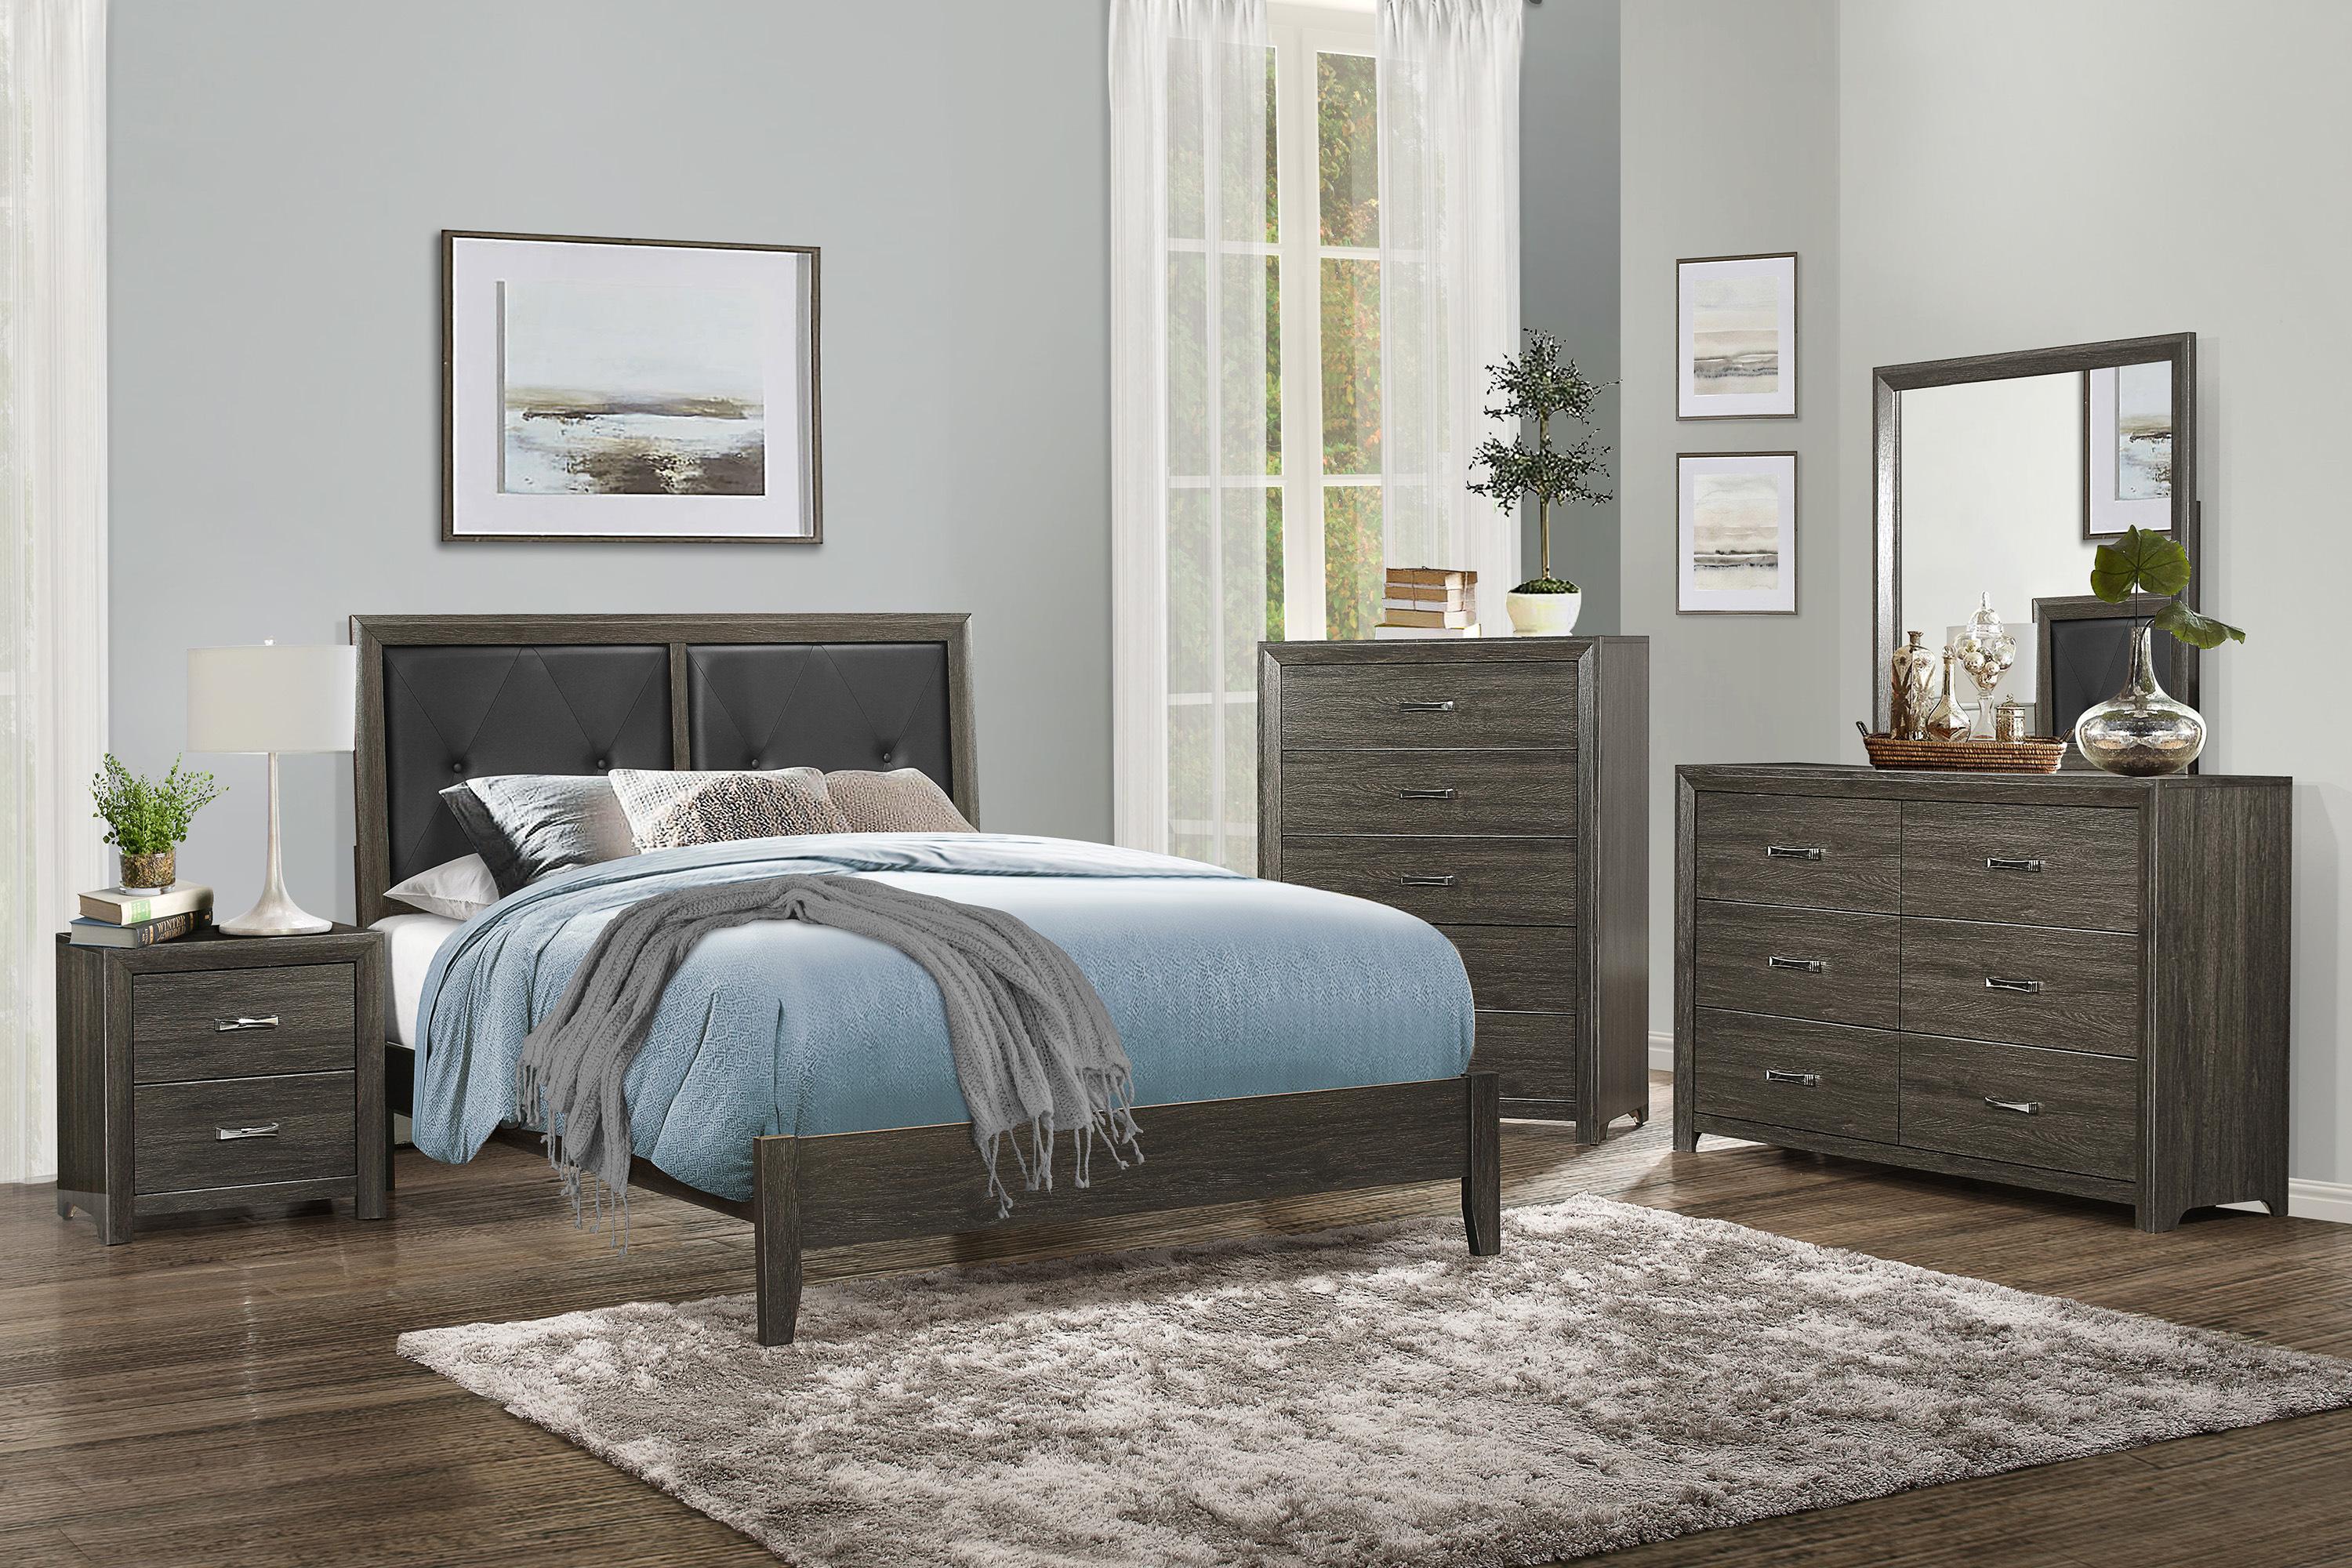 Contemporary Bedroom Set 2145NP-1-6PC Edina 2145NP-1-6PC in Dark Gray Faux Leather